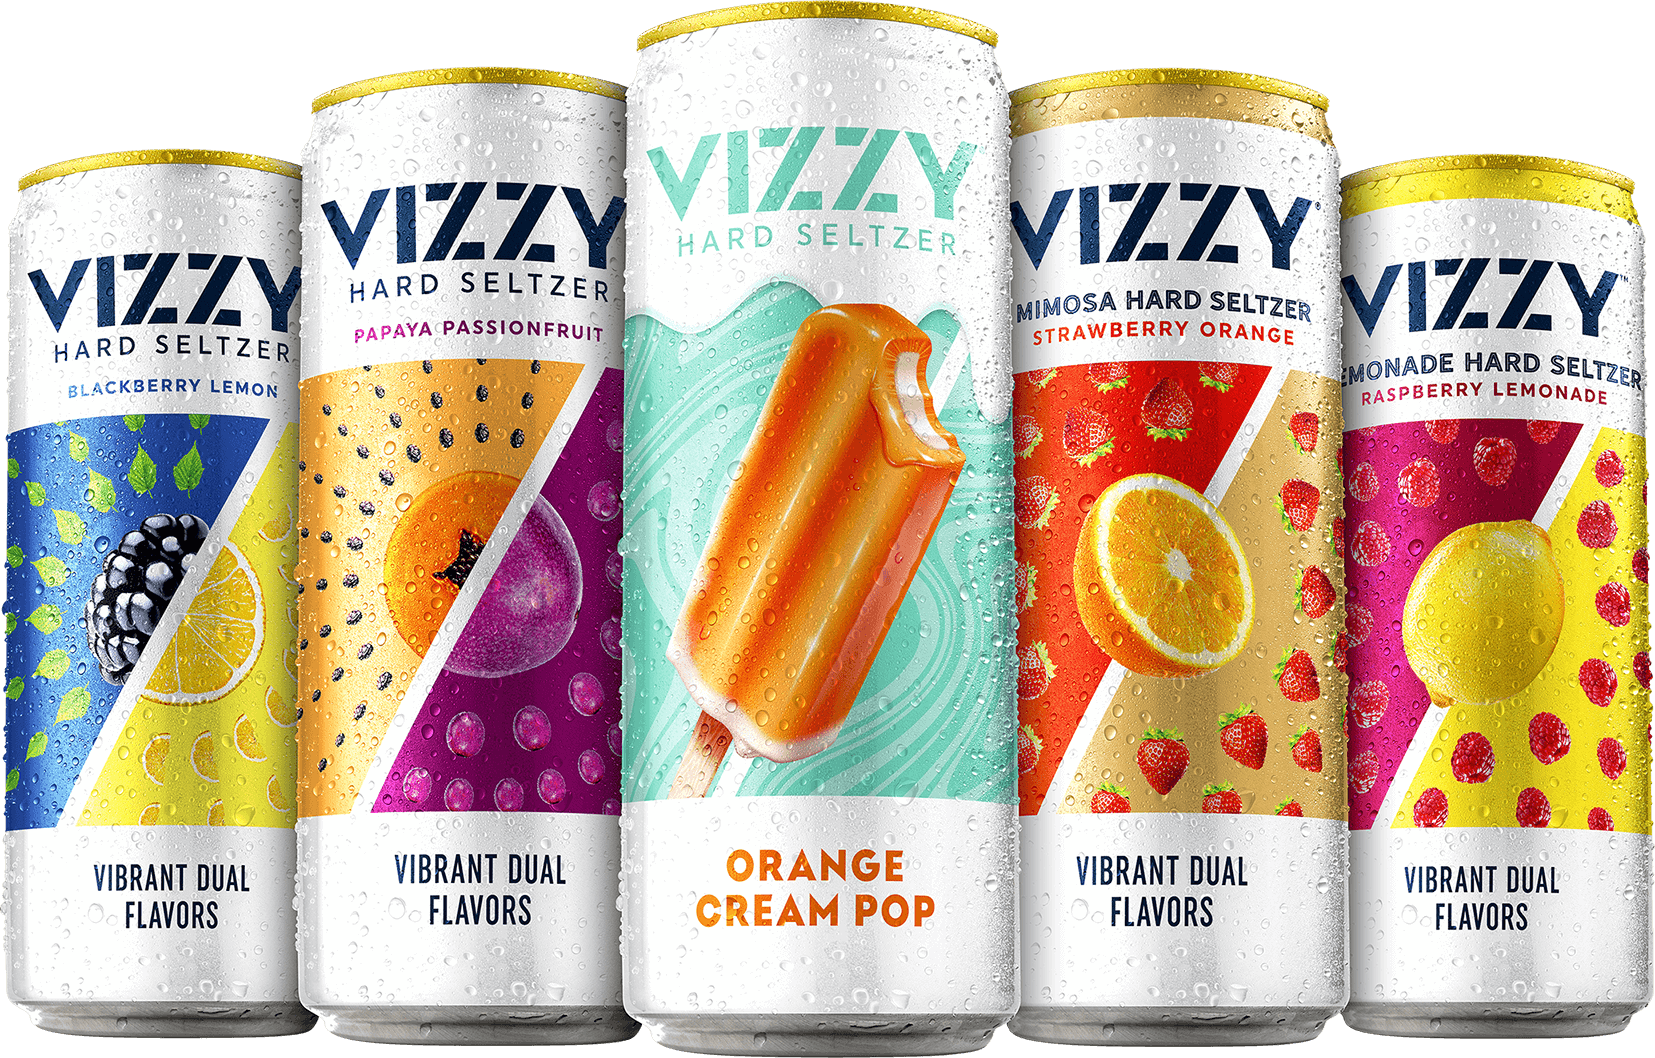 Vizzy cans